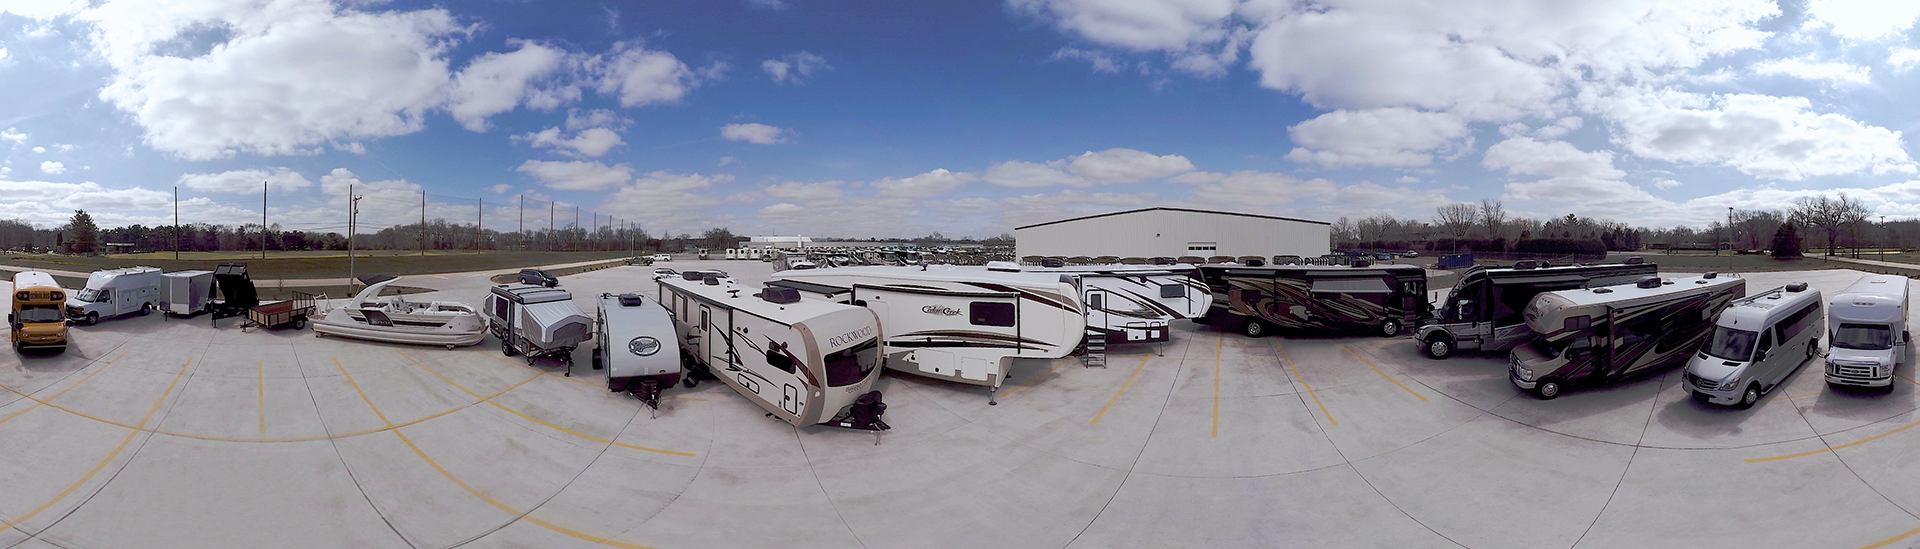 line up of shuttle buses, pontoon boats, cargo trailers and recreational vehicles